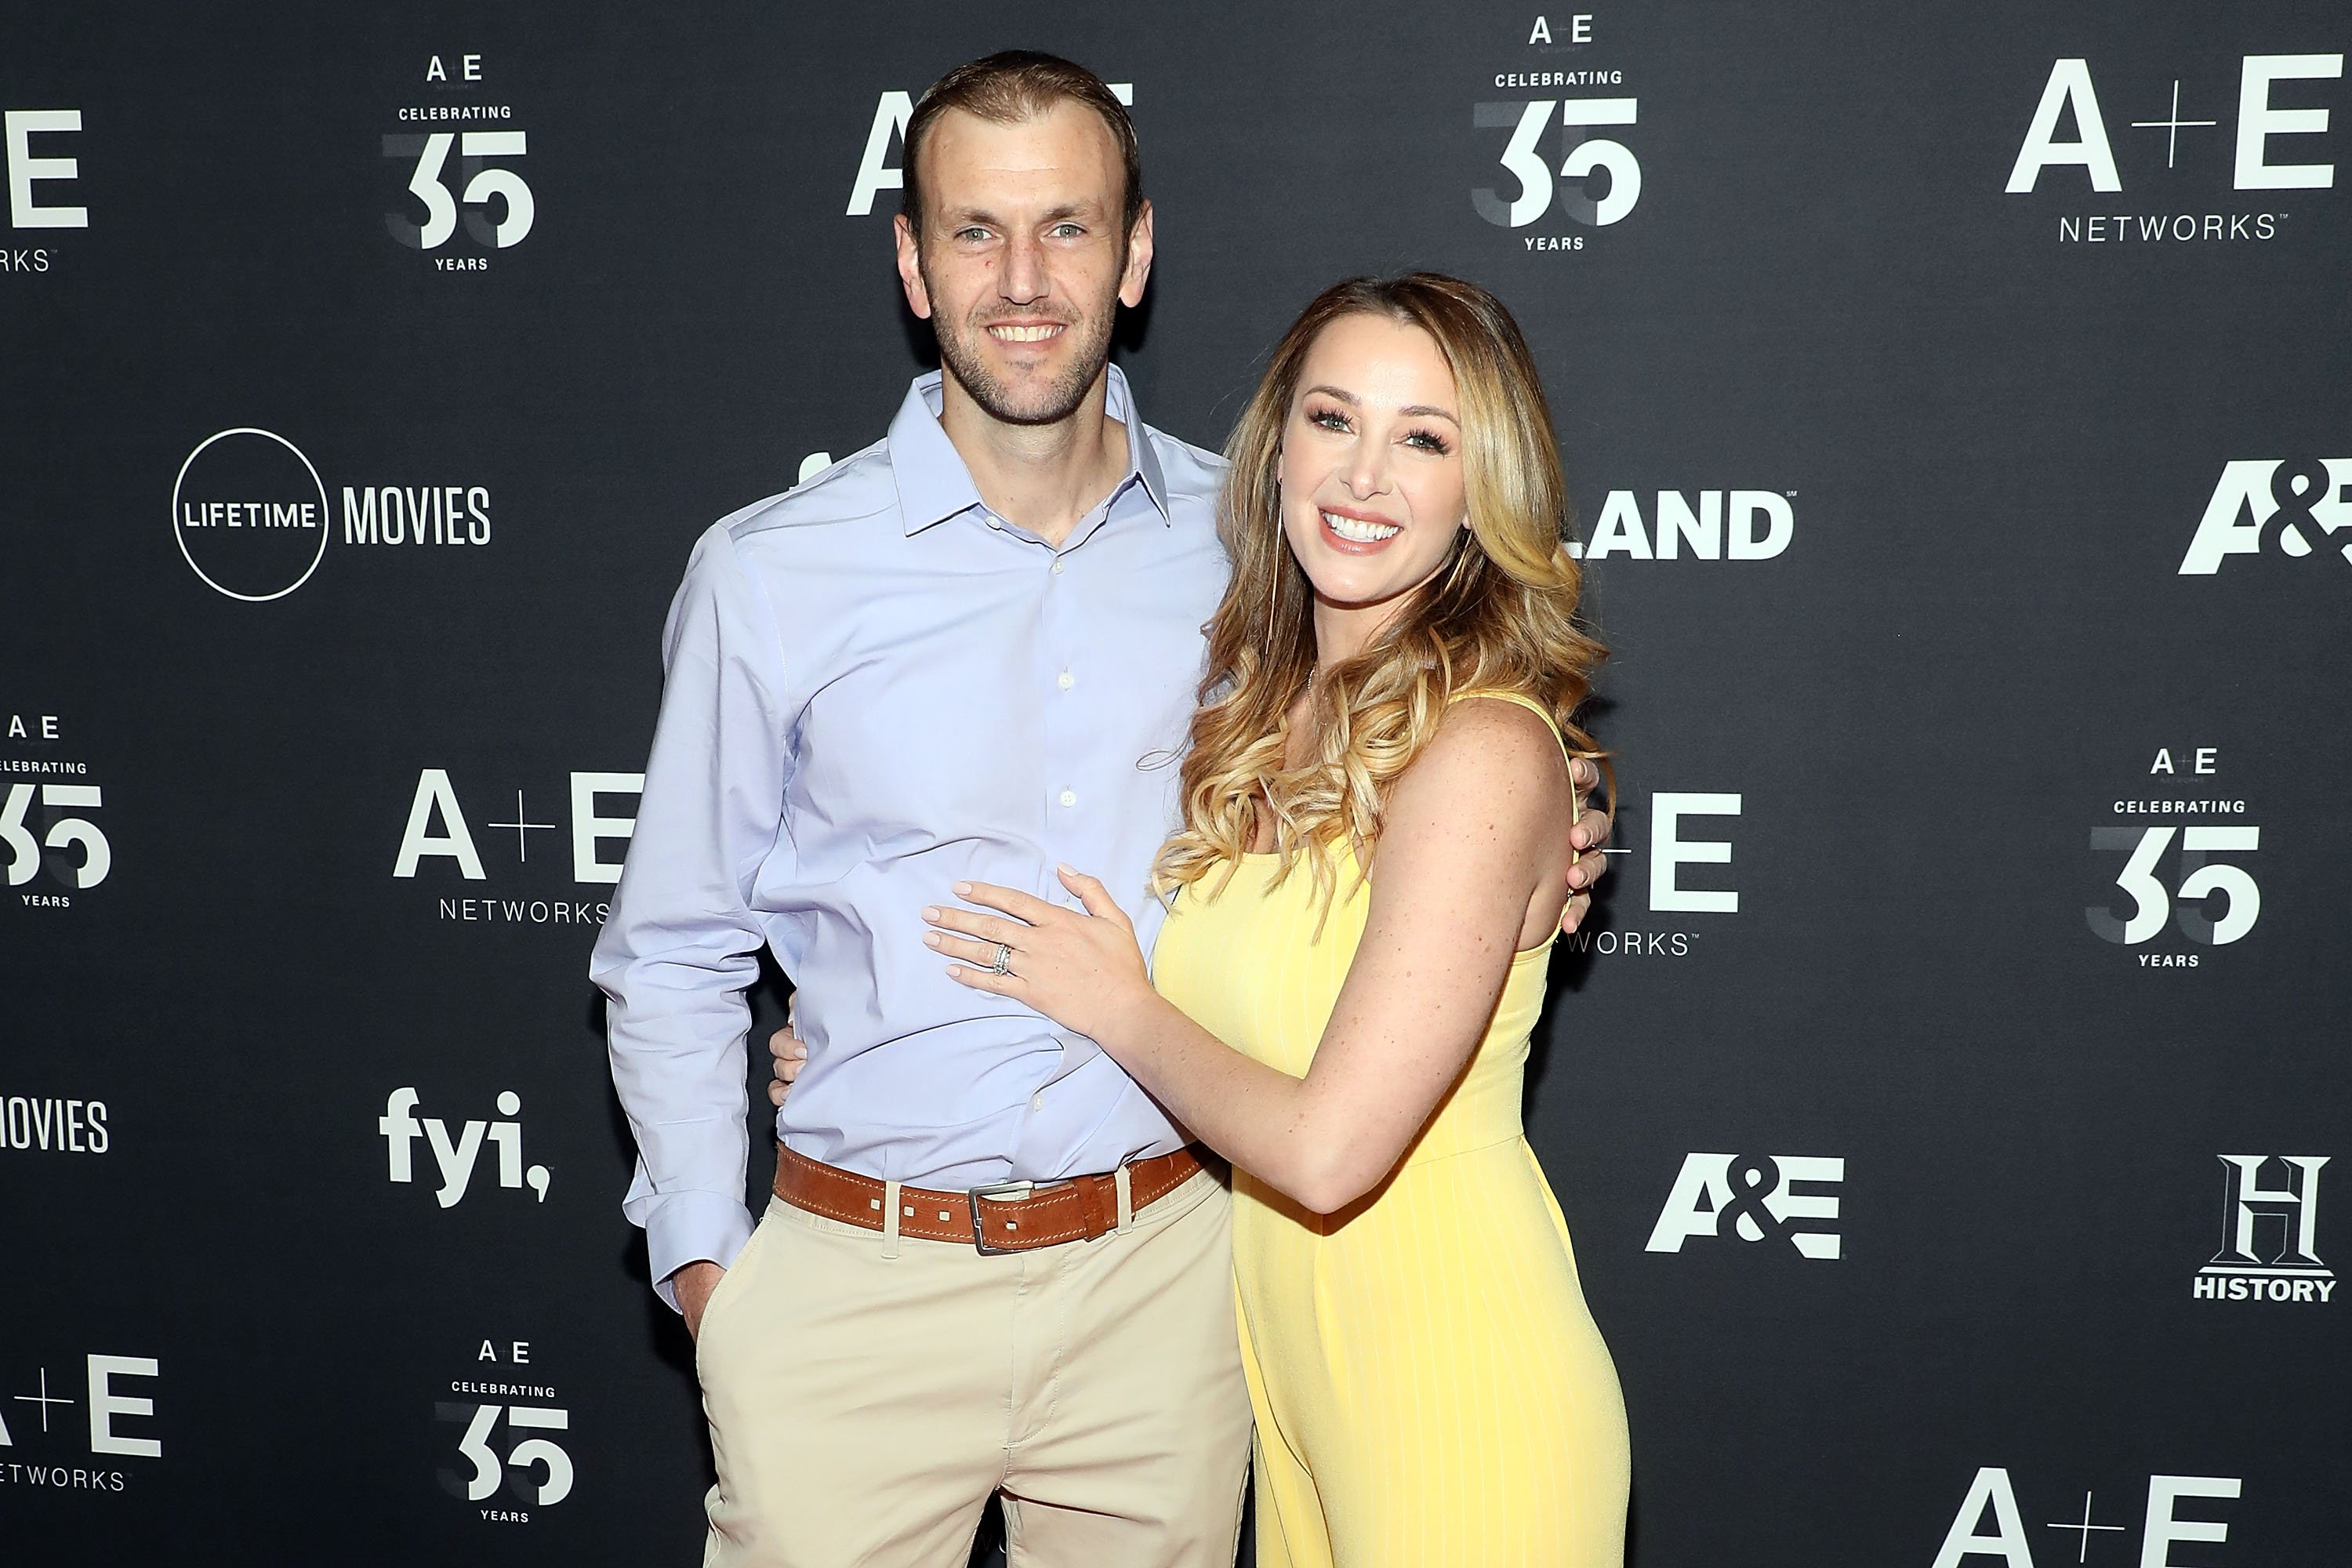 'Married at First Sight' couple Jamie Otis and Doug Hehner pose for a photo at an event in 2019